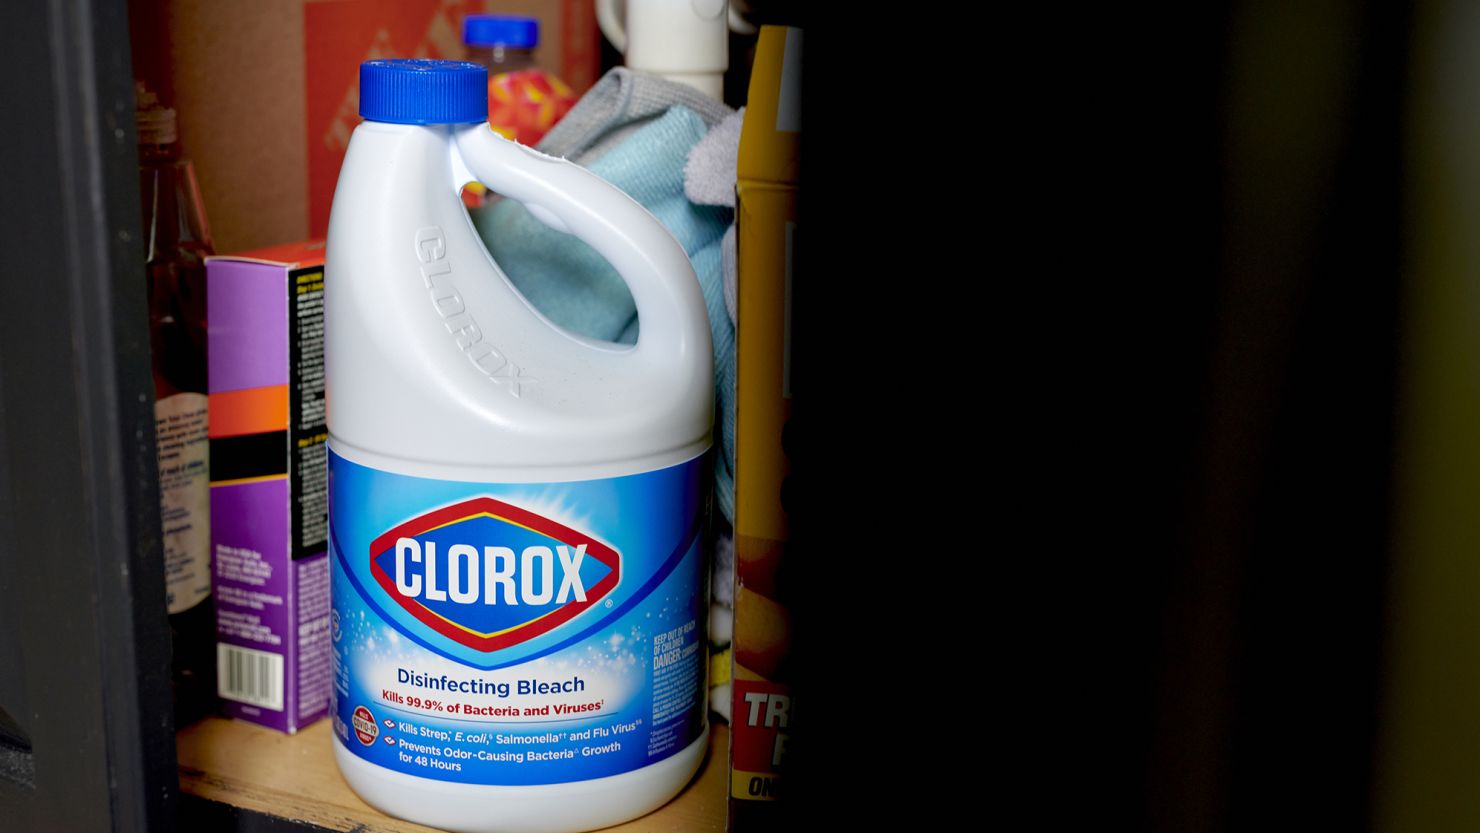 Clorox said a cyberattack is disrupting operations.